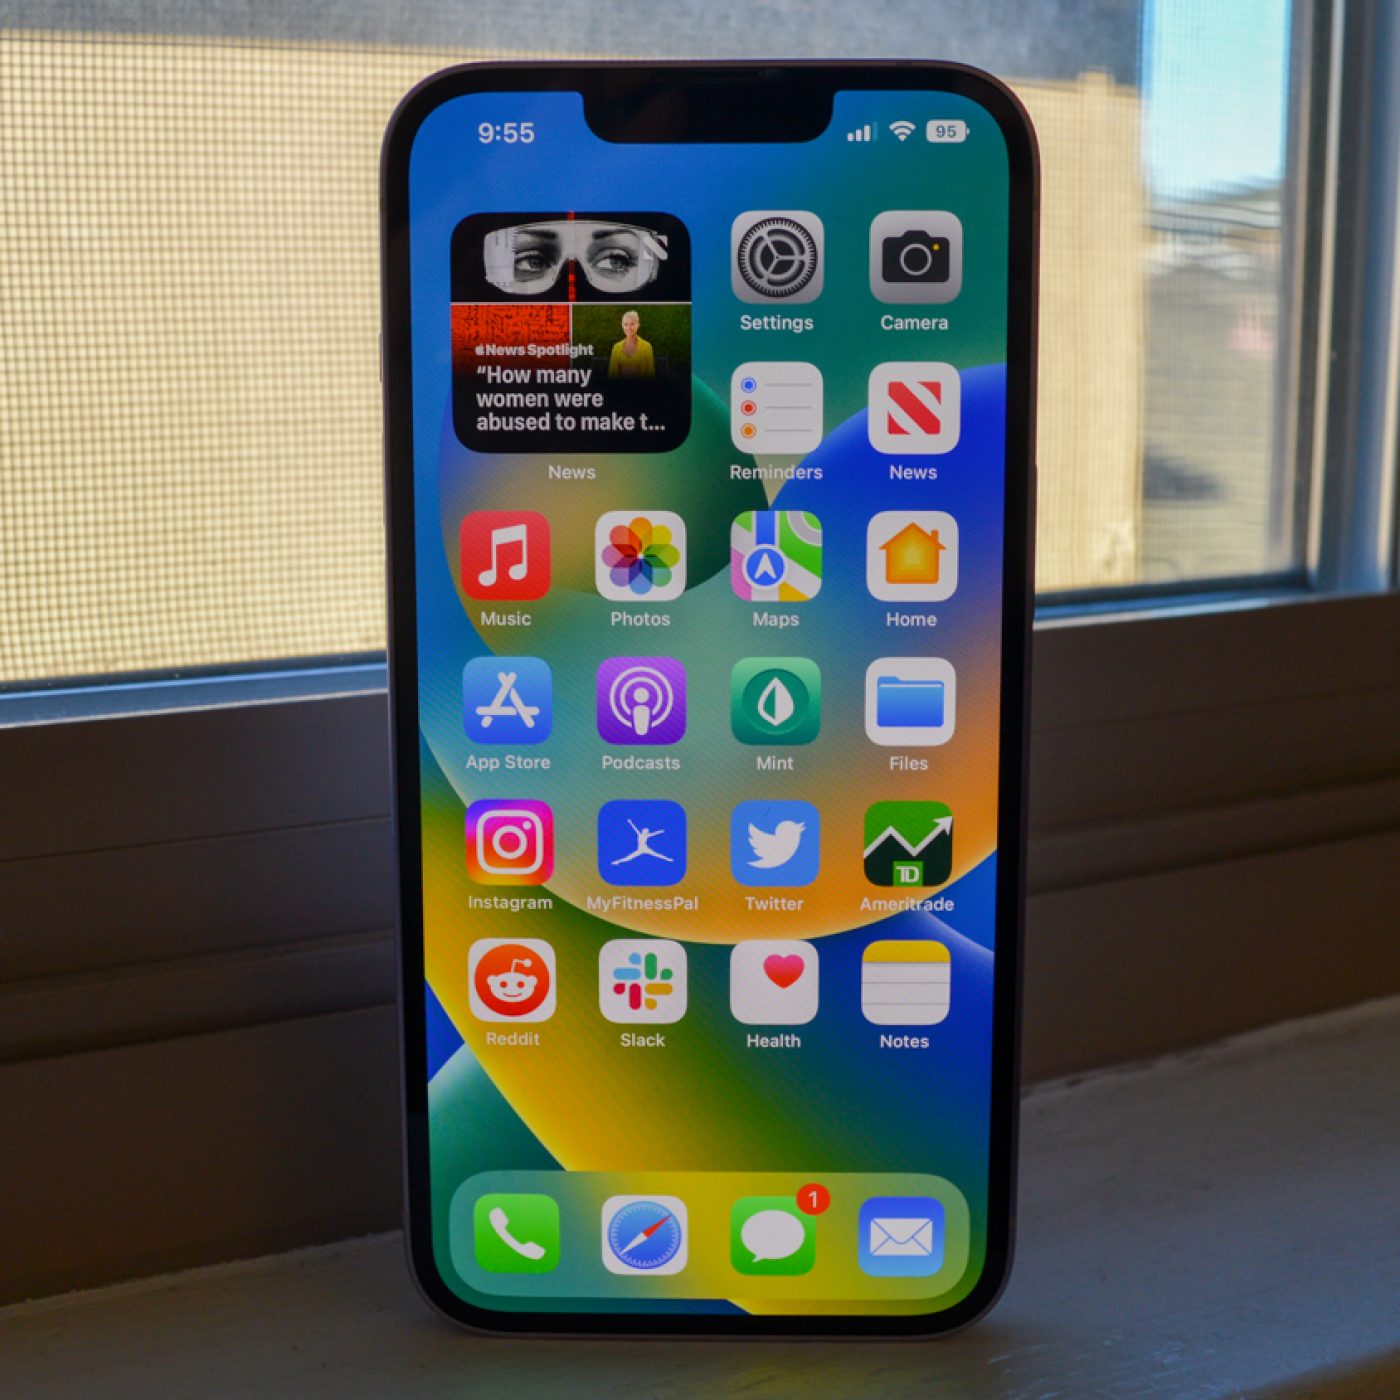 iOS 14 code confirms Apple planning 'iPhone 9 Plus' with A13 as larger  version of rumored entry-level model - 9to5Mac